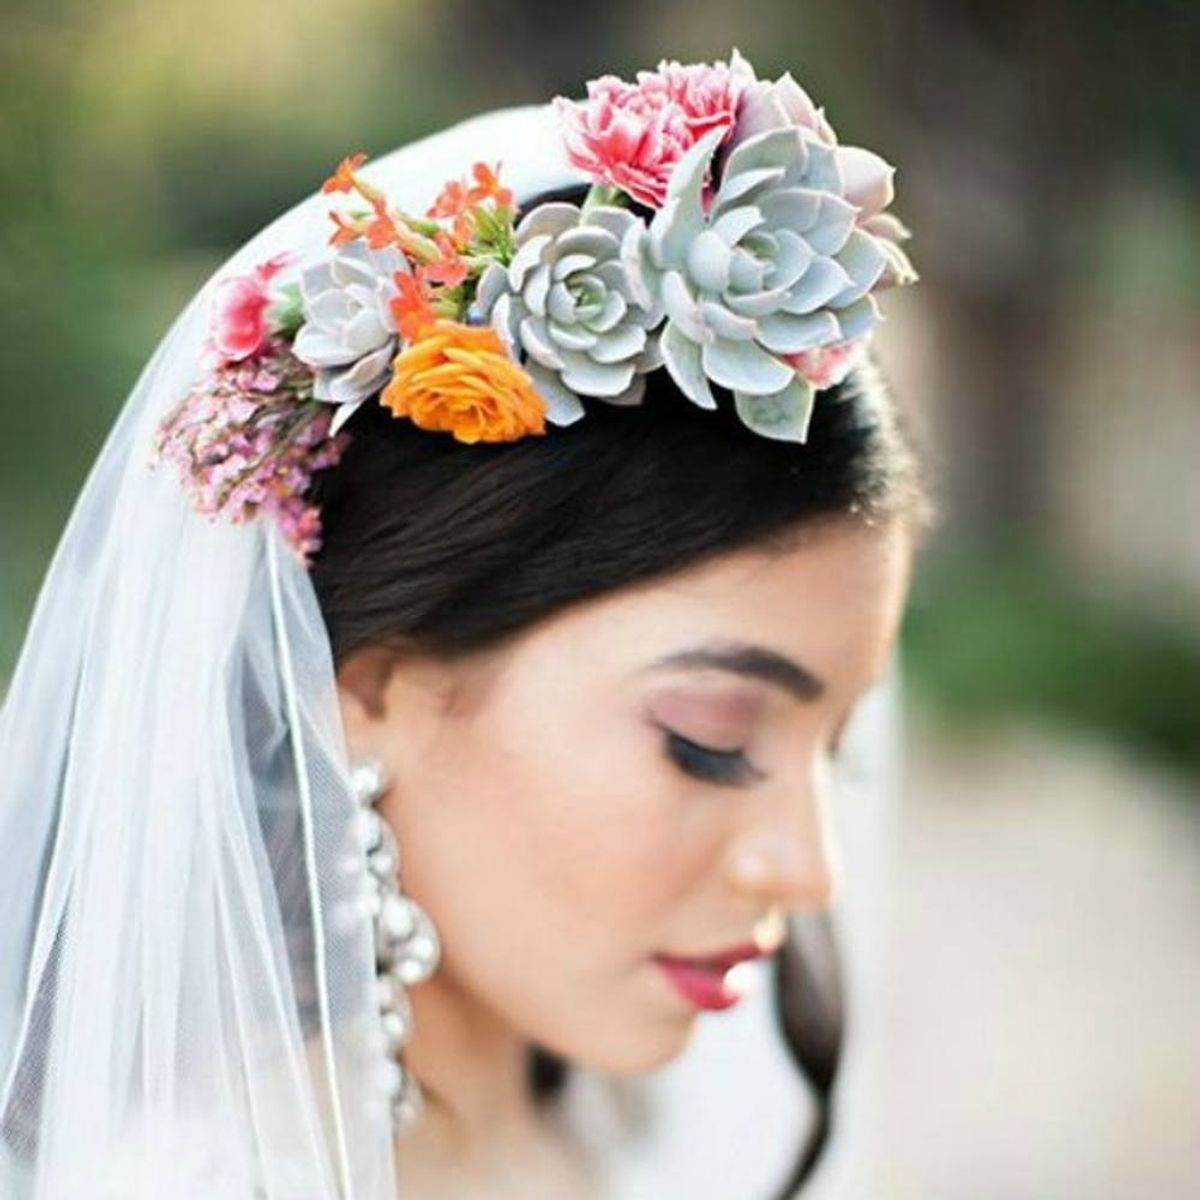 15 Unexpected Hairstyles That Are Perfect for Your Wedding Day